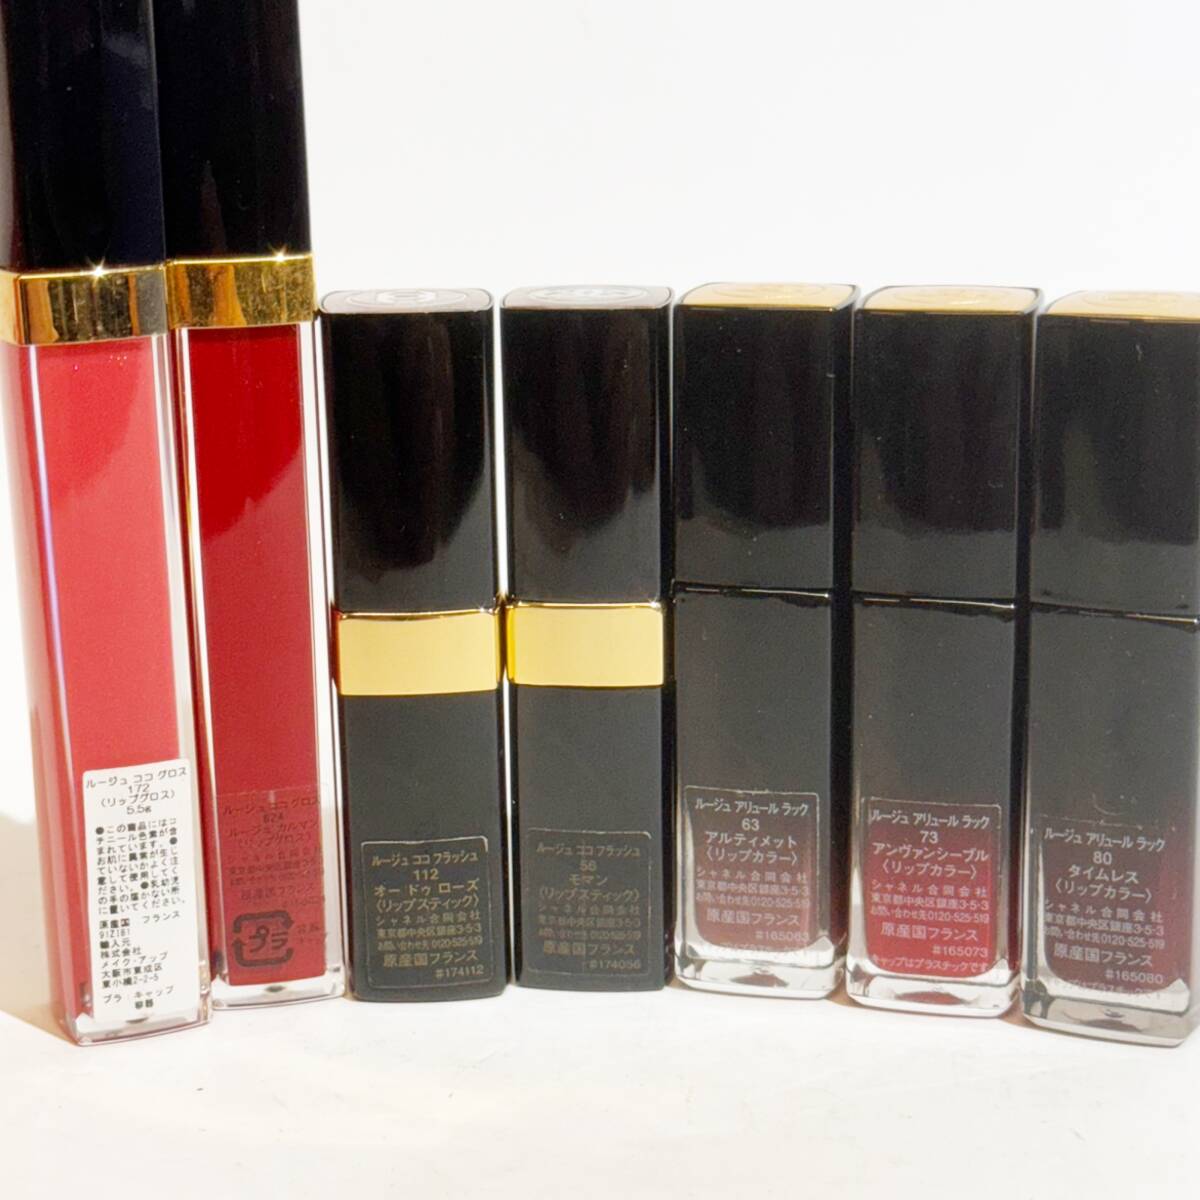 CHANEL Chanel * lipstick, gloss 7 pcs set * rouge here flash, rouge Allure rack, rouge here gloss 